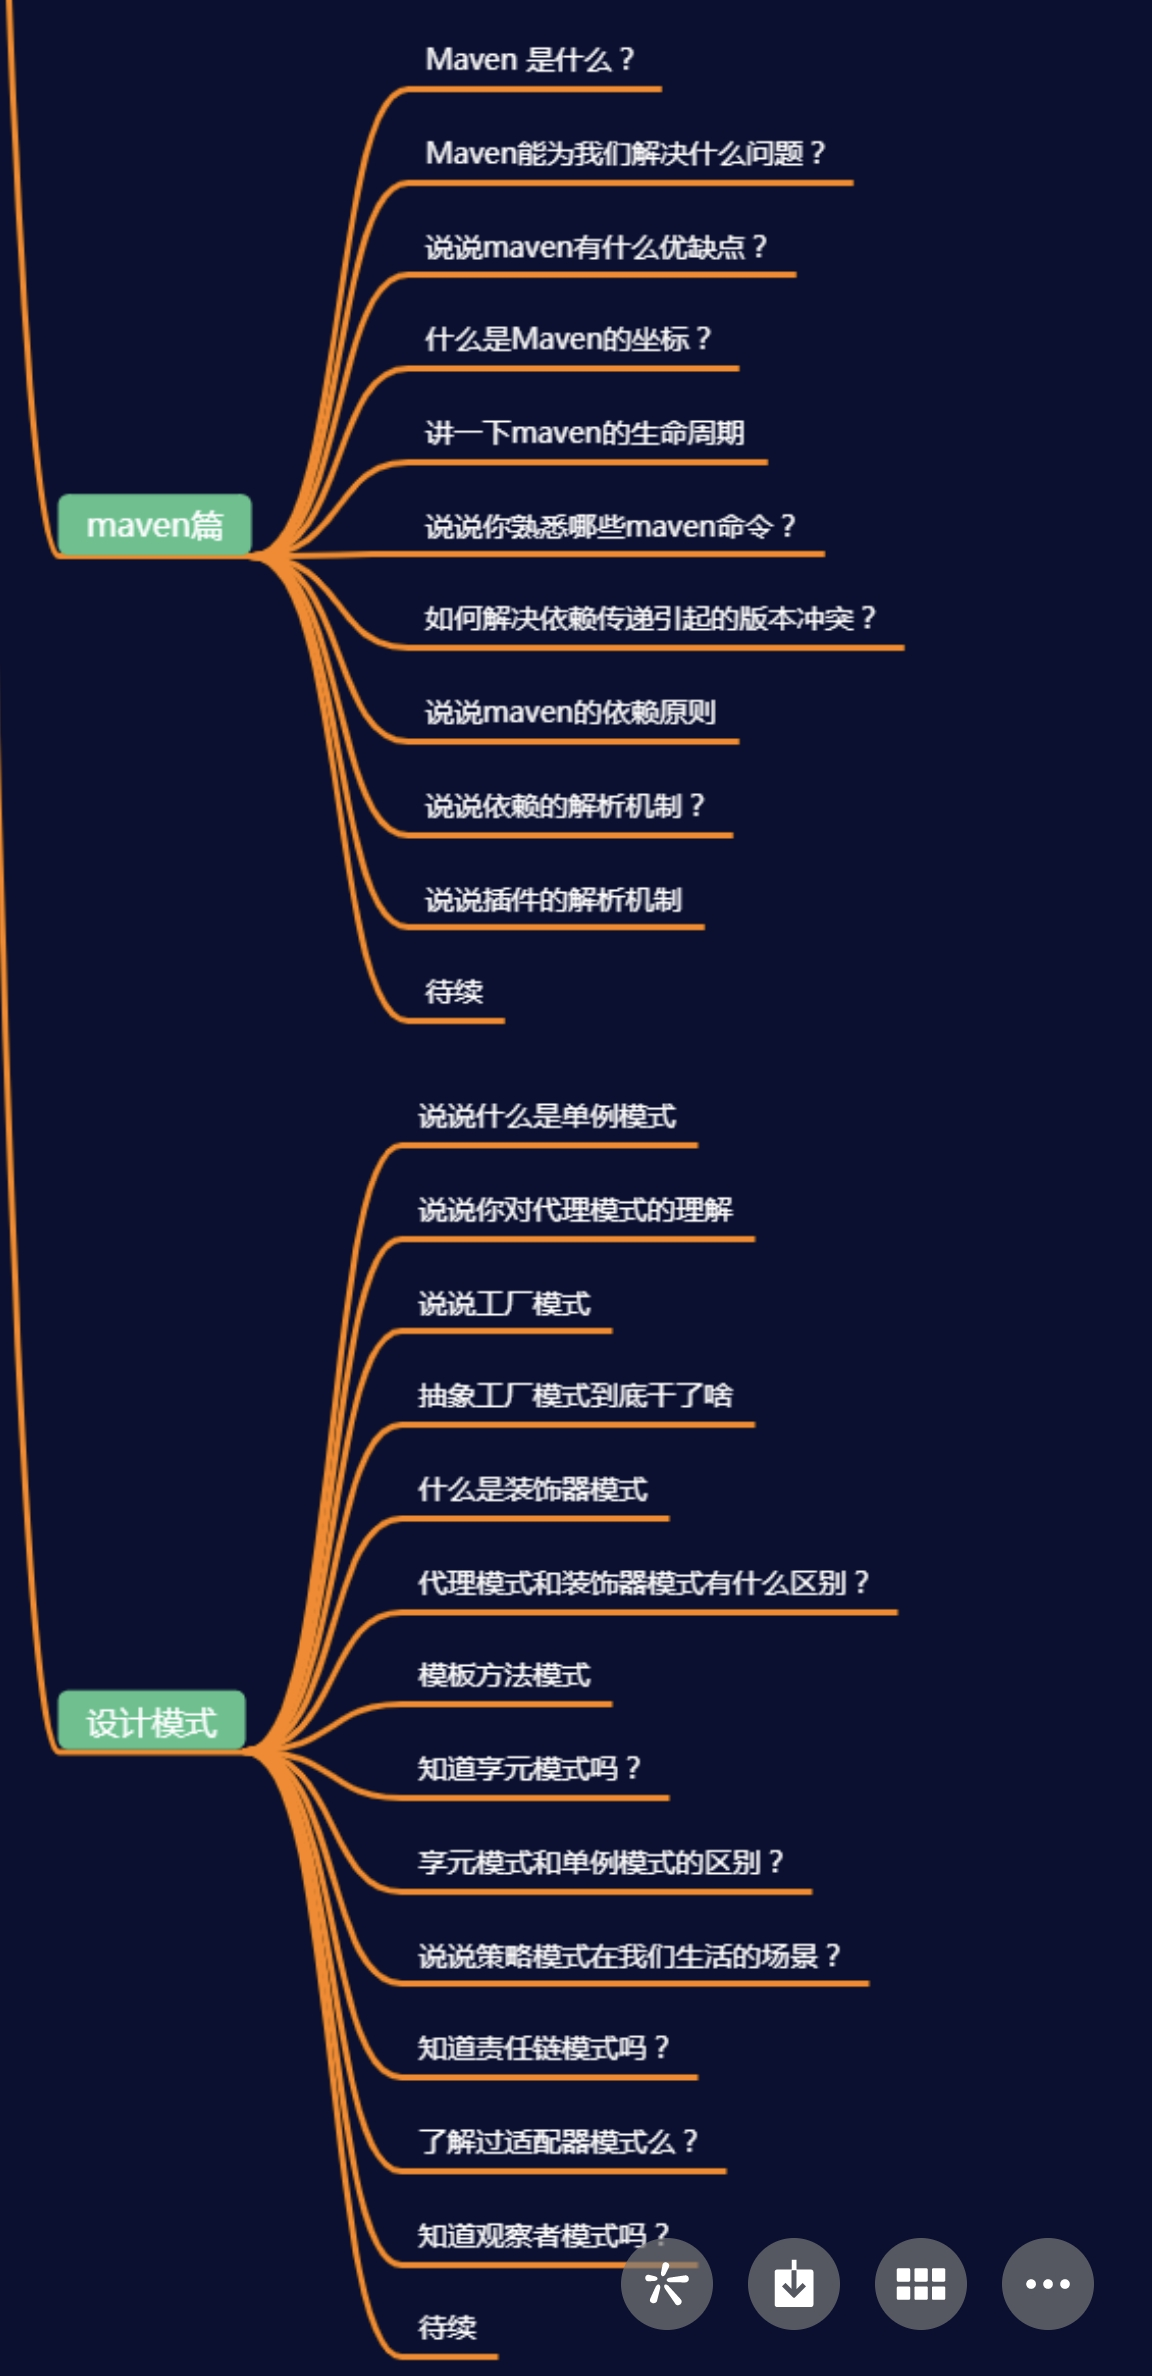 Ali + Tencent + Byte + Didi + Meituan java interview questions and answers (2021 version) 1353 questions are all open source